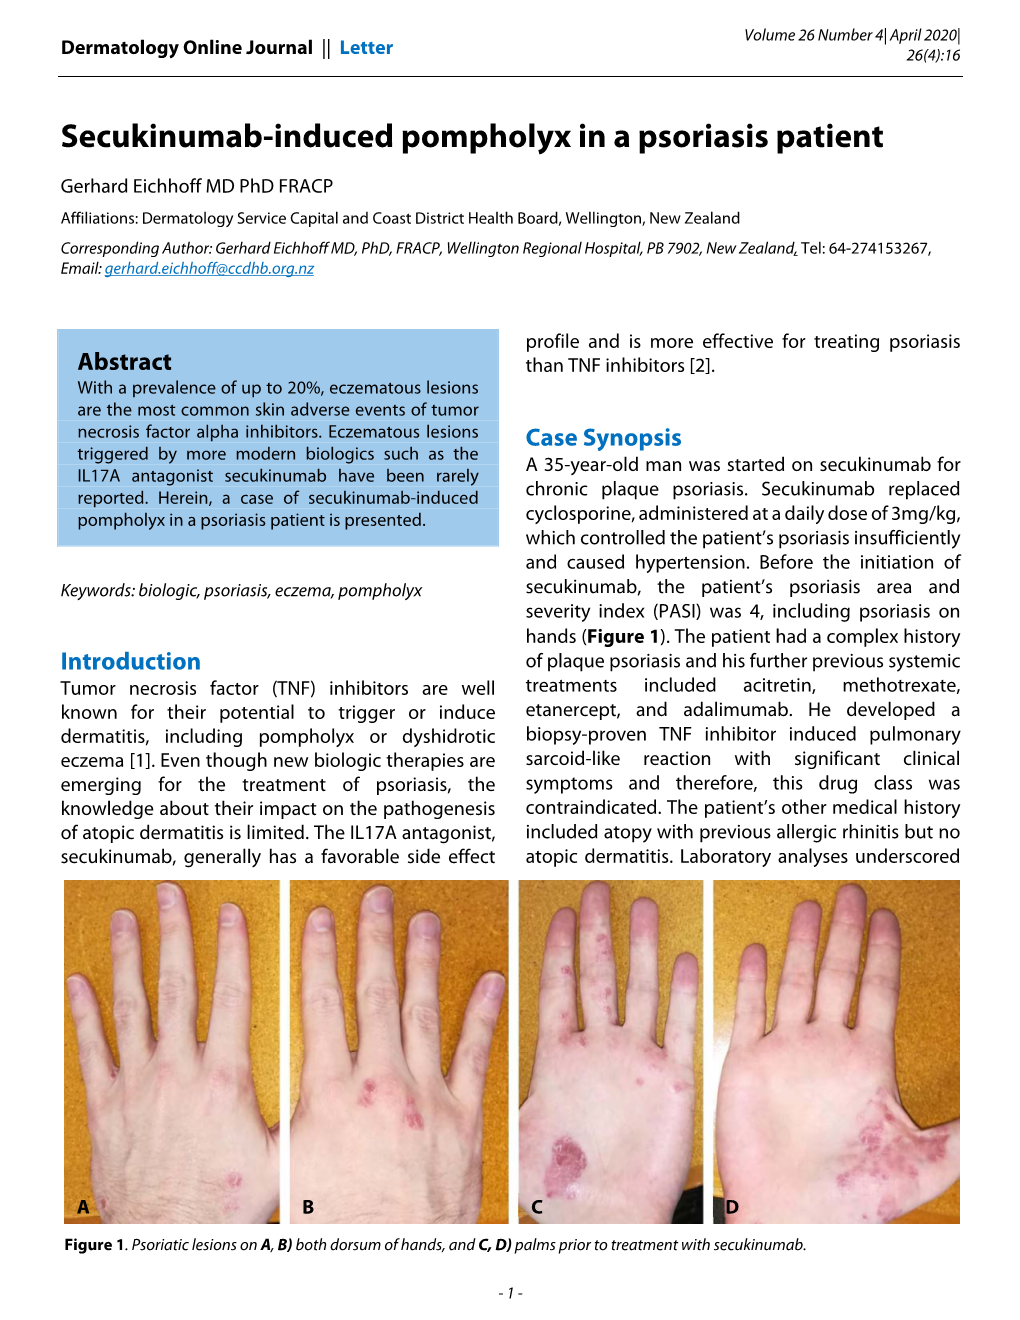 Secukinumab-Induced Pompholyx in a Psoriasis Patient